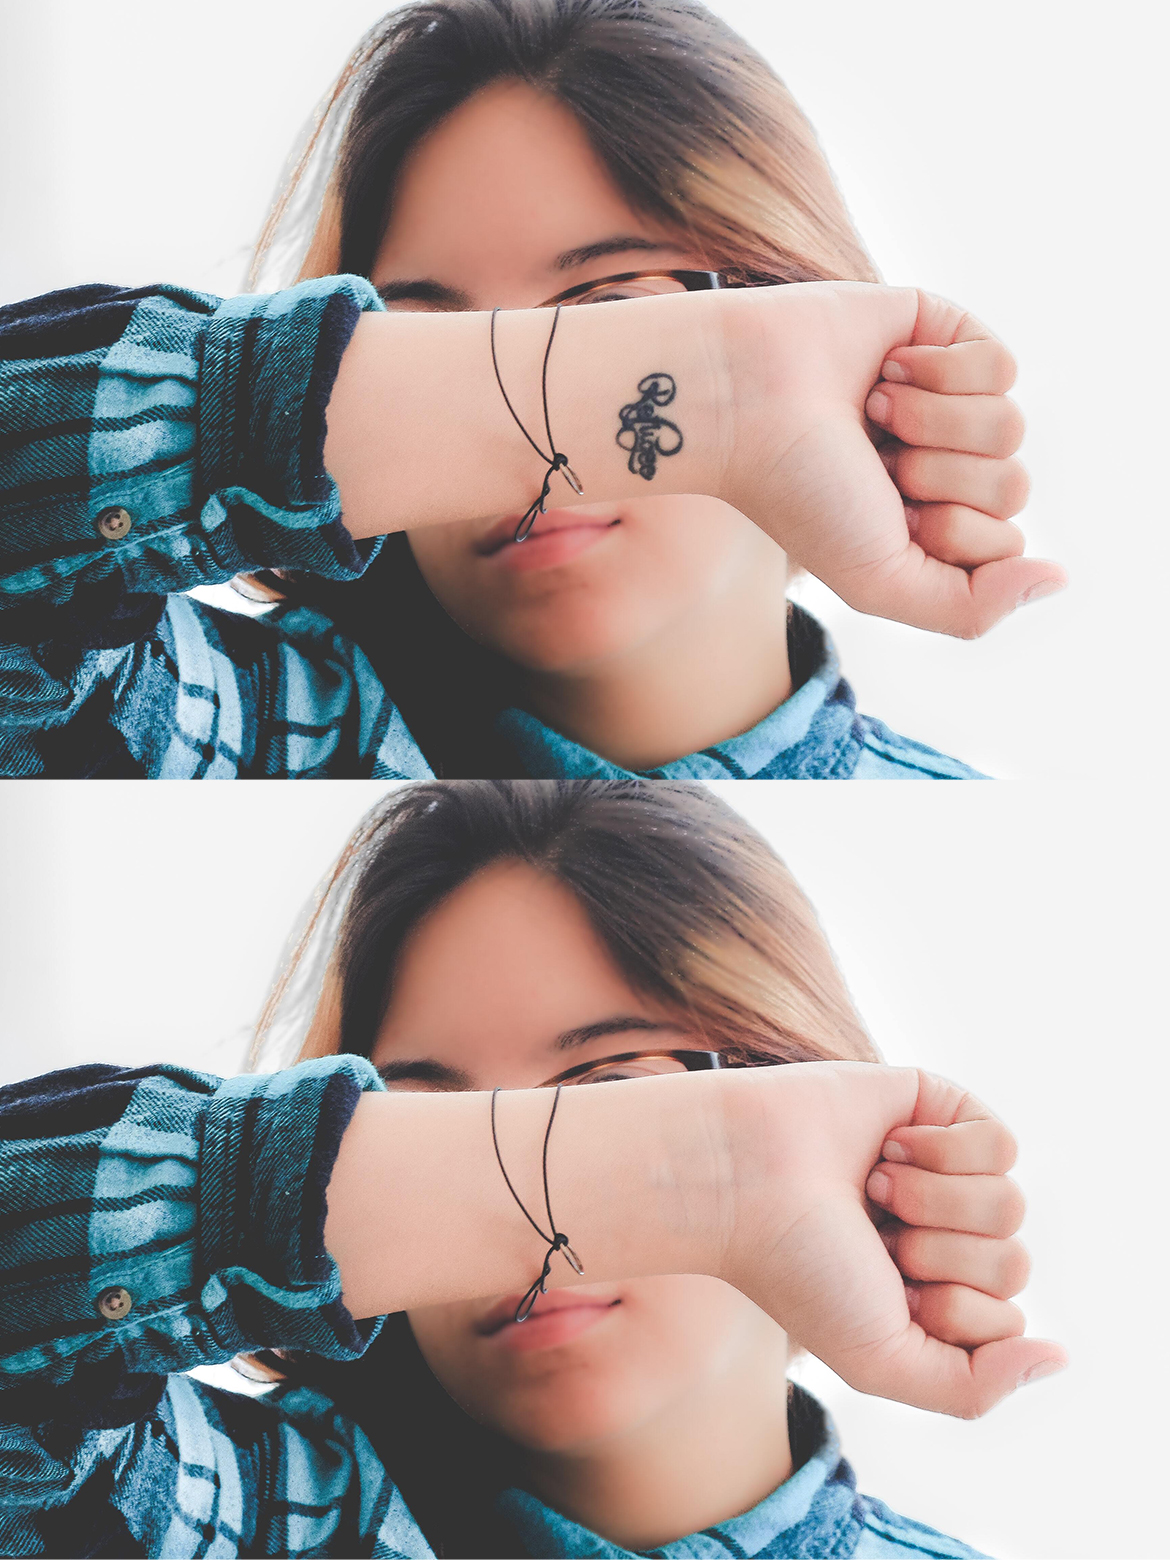 Handy Tips To Hide Your Tattoos With Makeup